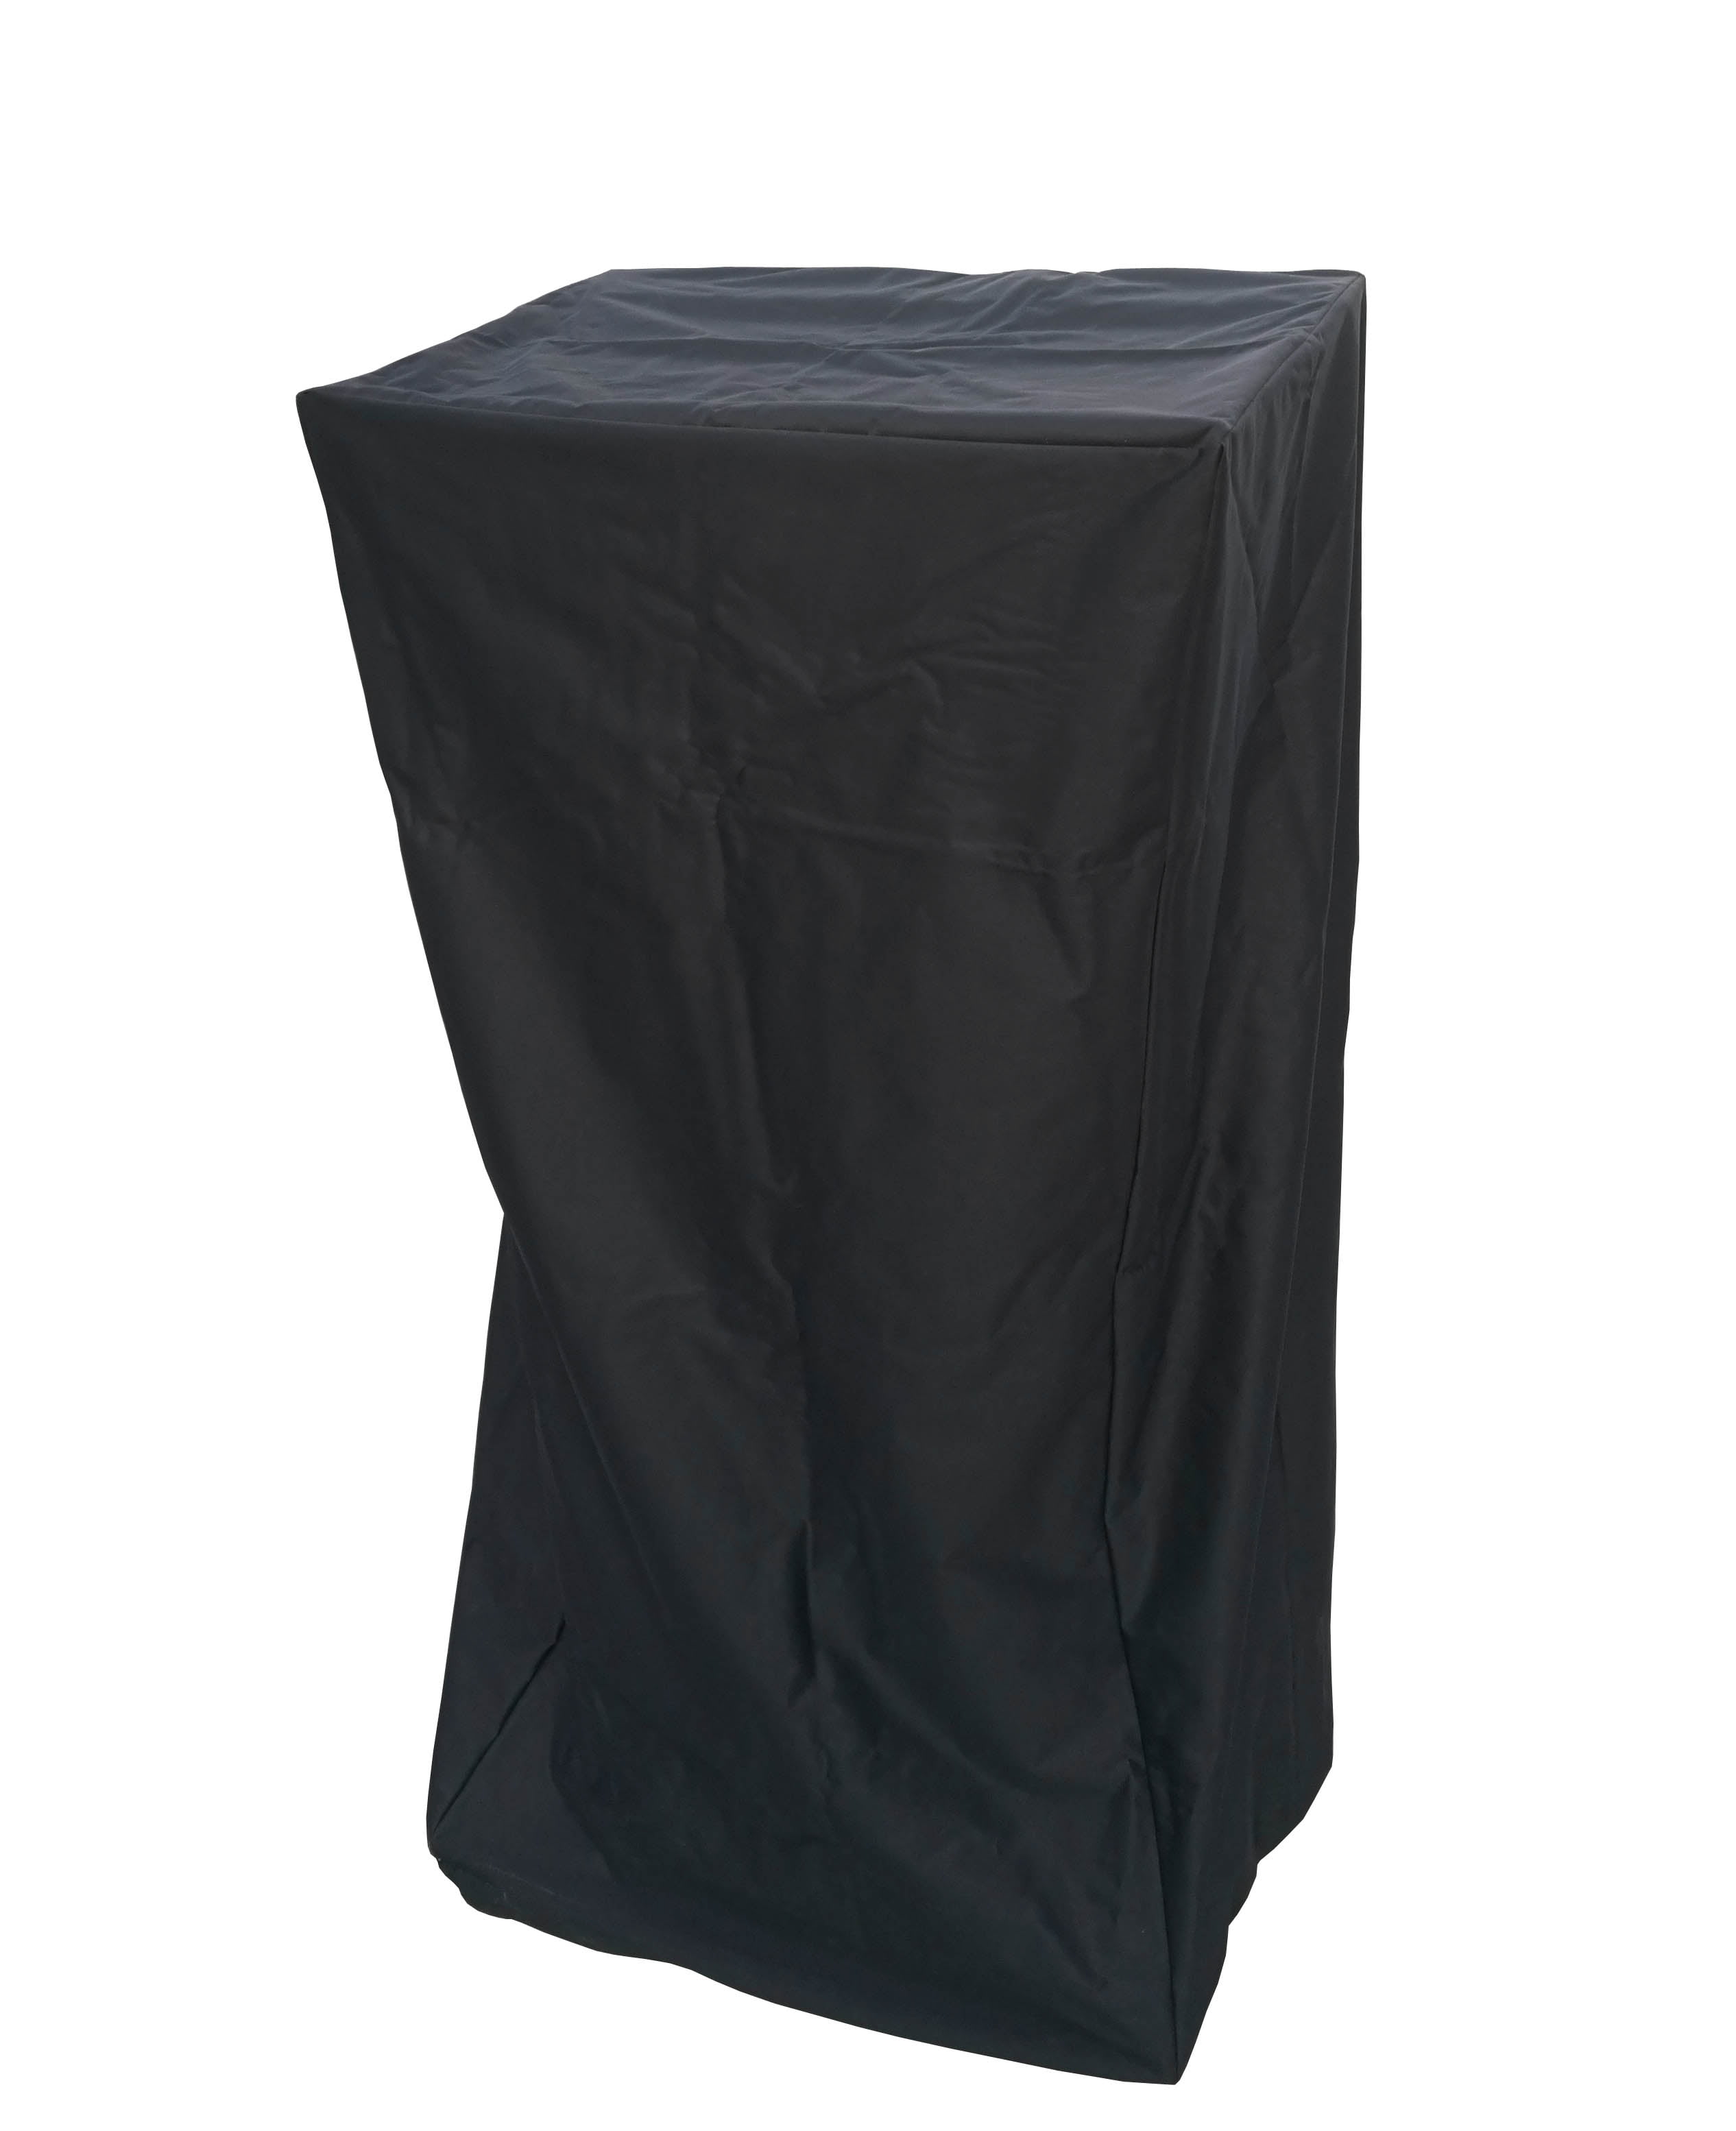 FixtureDisplays Podium Protective Cover Pulpit Cover Lectern Padded Cover 24.2W x 49H x 17.7D 1803-8-TAN 